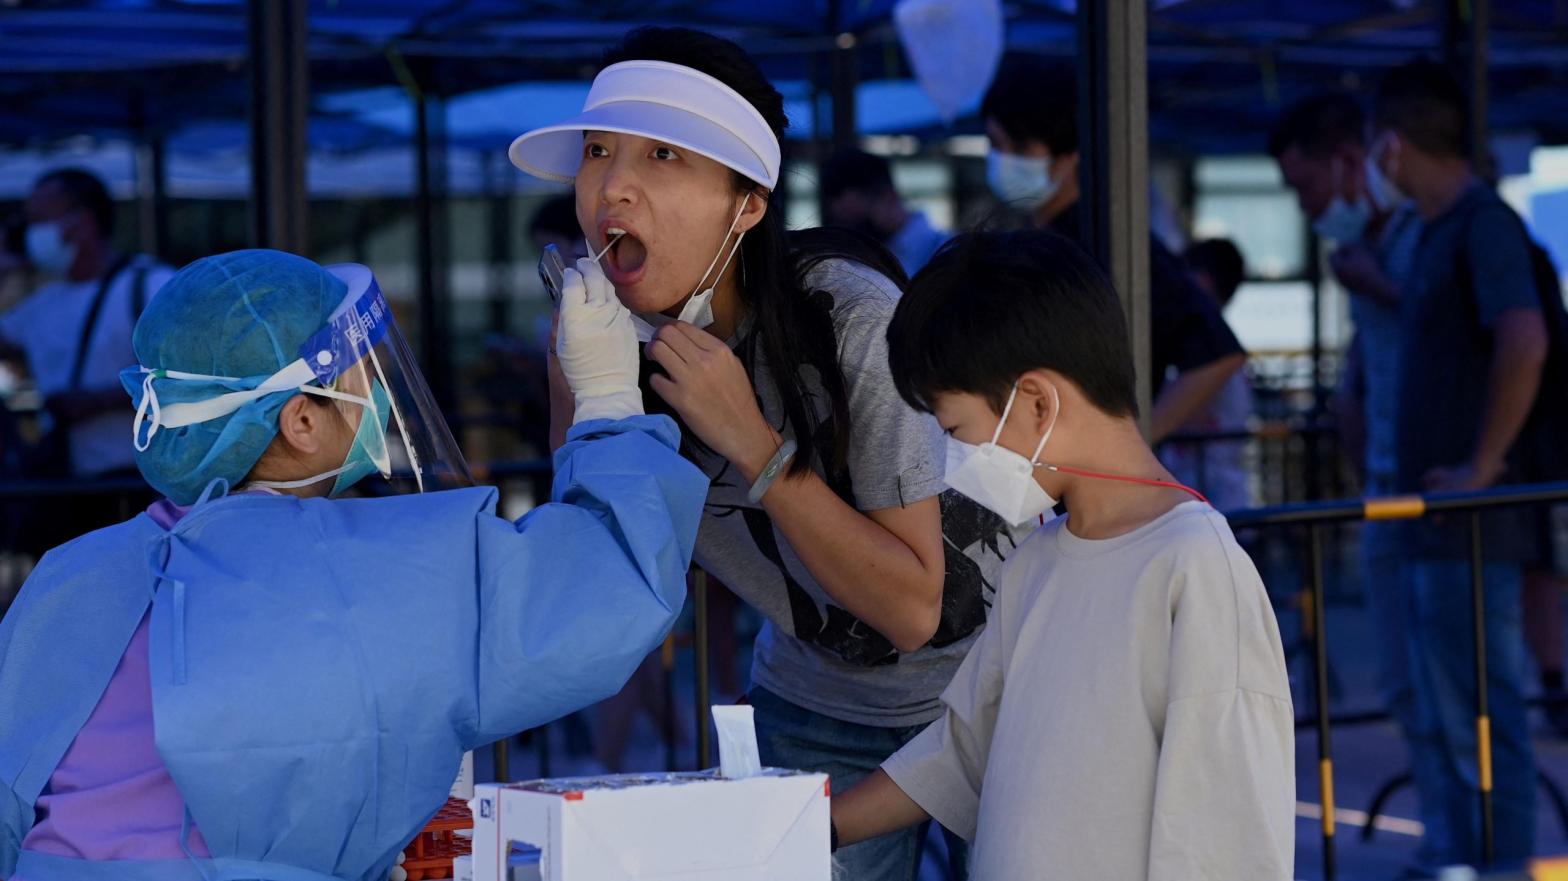 A health worker takes a nucleic acid sample for covid-19 at the arriving passengers terminal at the Zhuhai train station in Zhuhai, in southern China's Guangdong province on September 27, 2021. (Photo: Noel Celis/AFP, Getty Images)